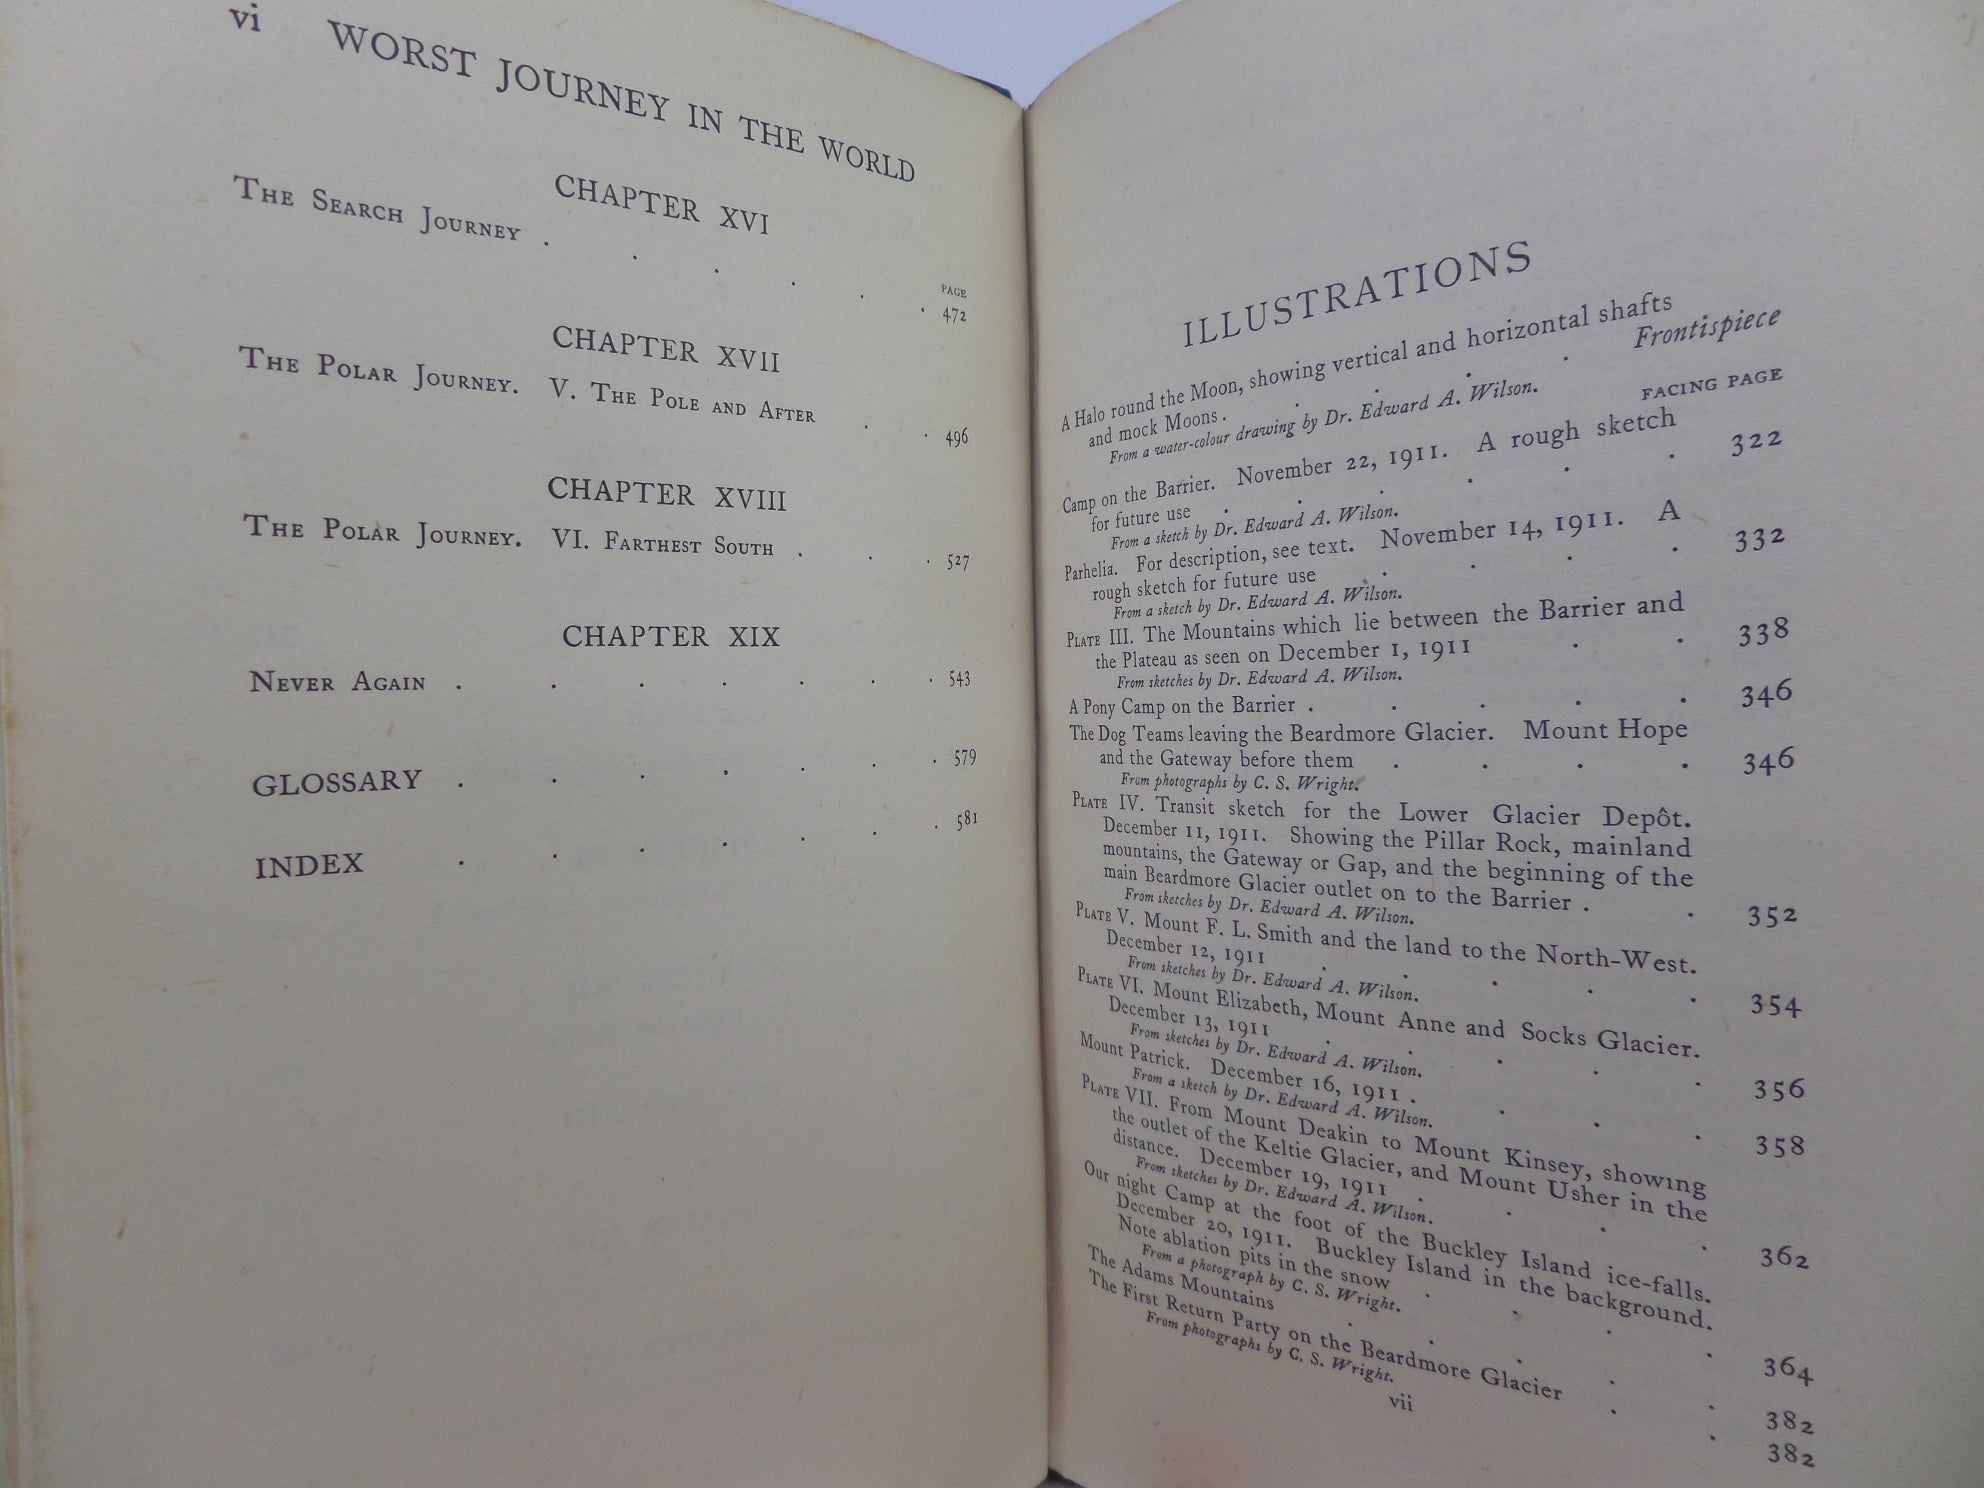 THE WORST JOURNEY IN THE WORLD BY APSLEY CHERRY-GARRARD 1929 SECOND EDITION